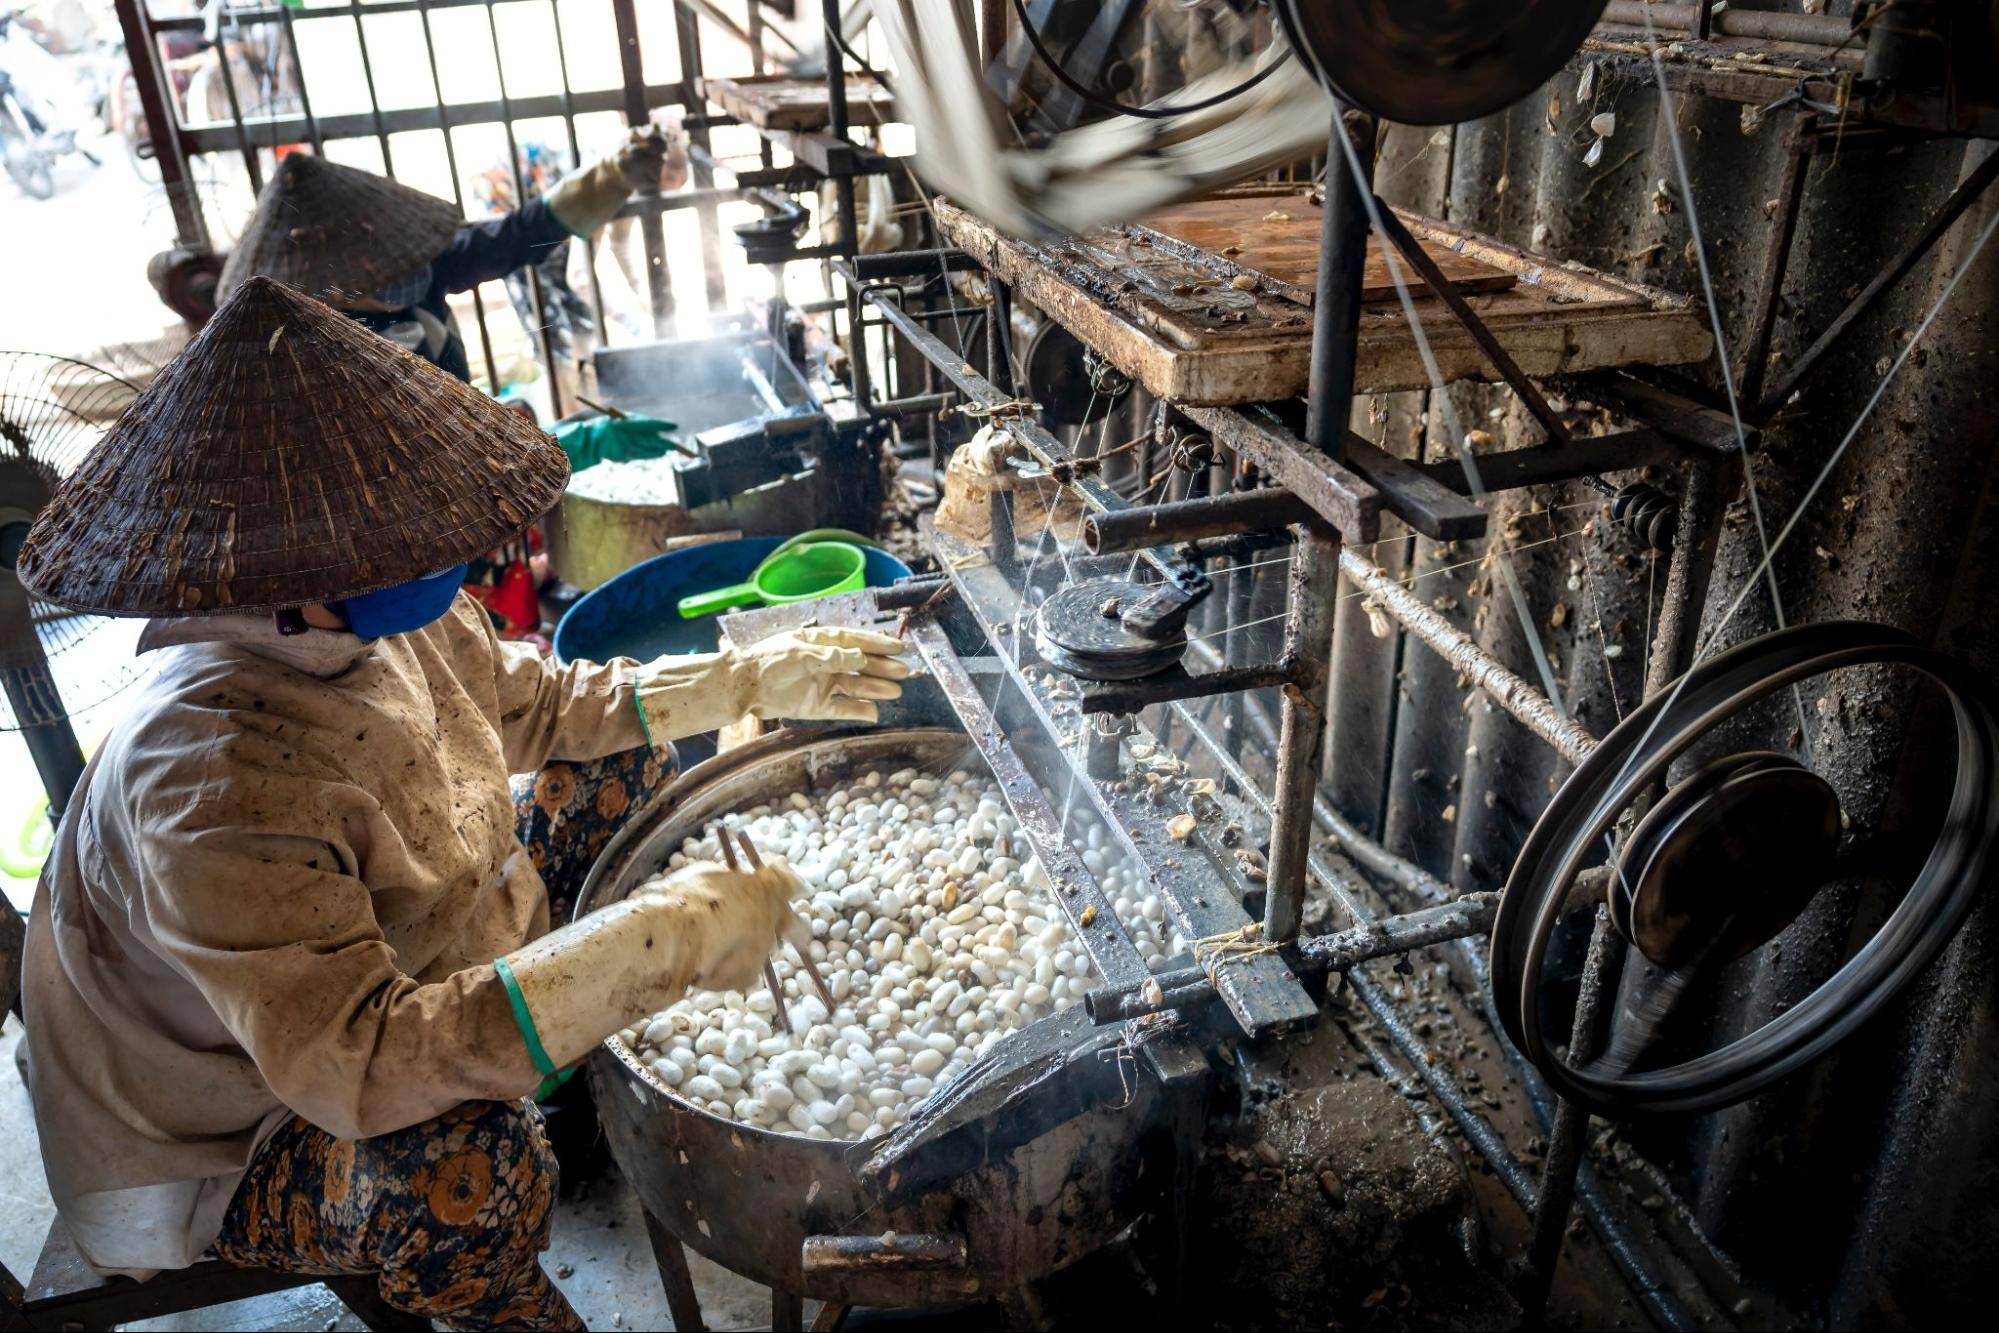 Process of extracting silk from silkworms